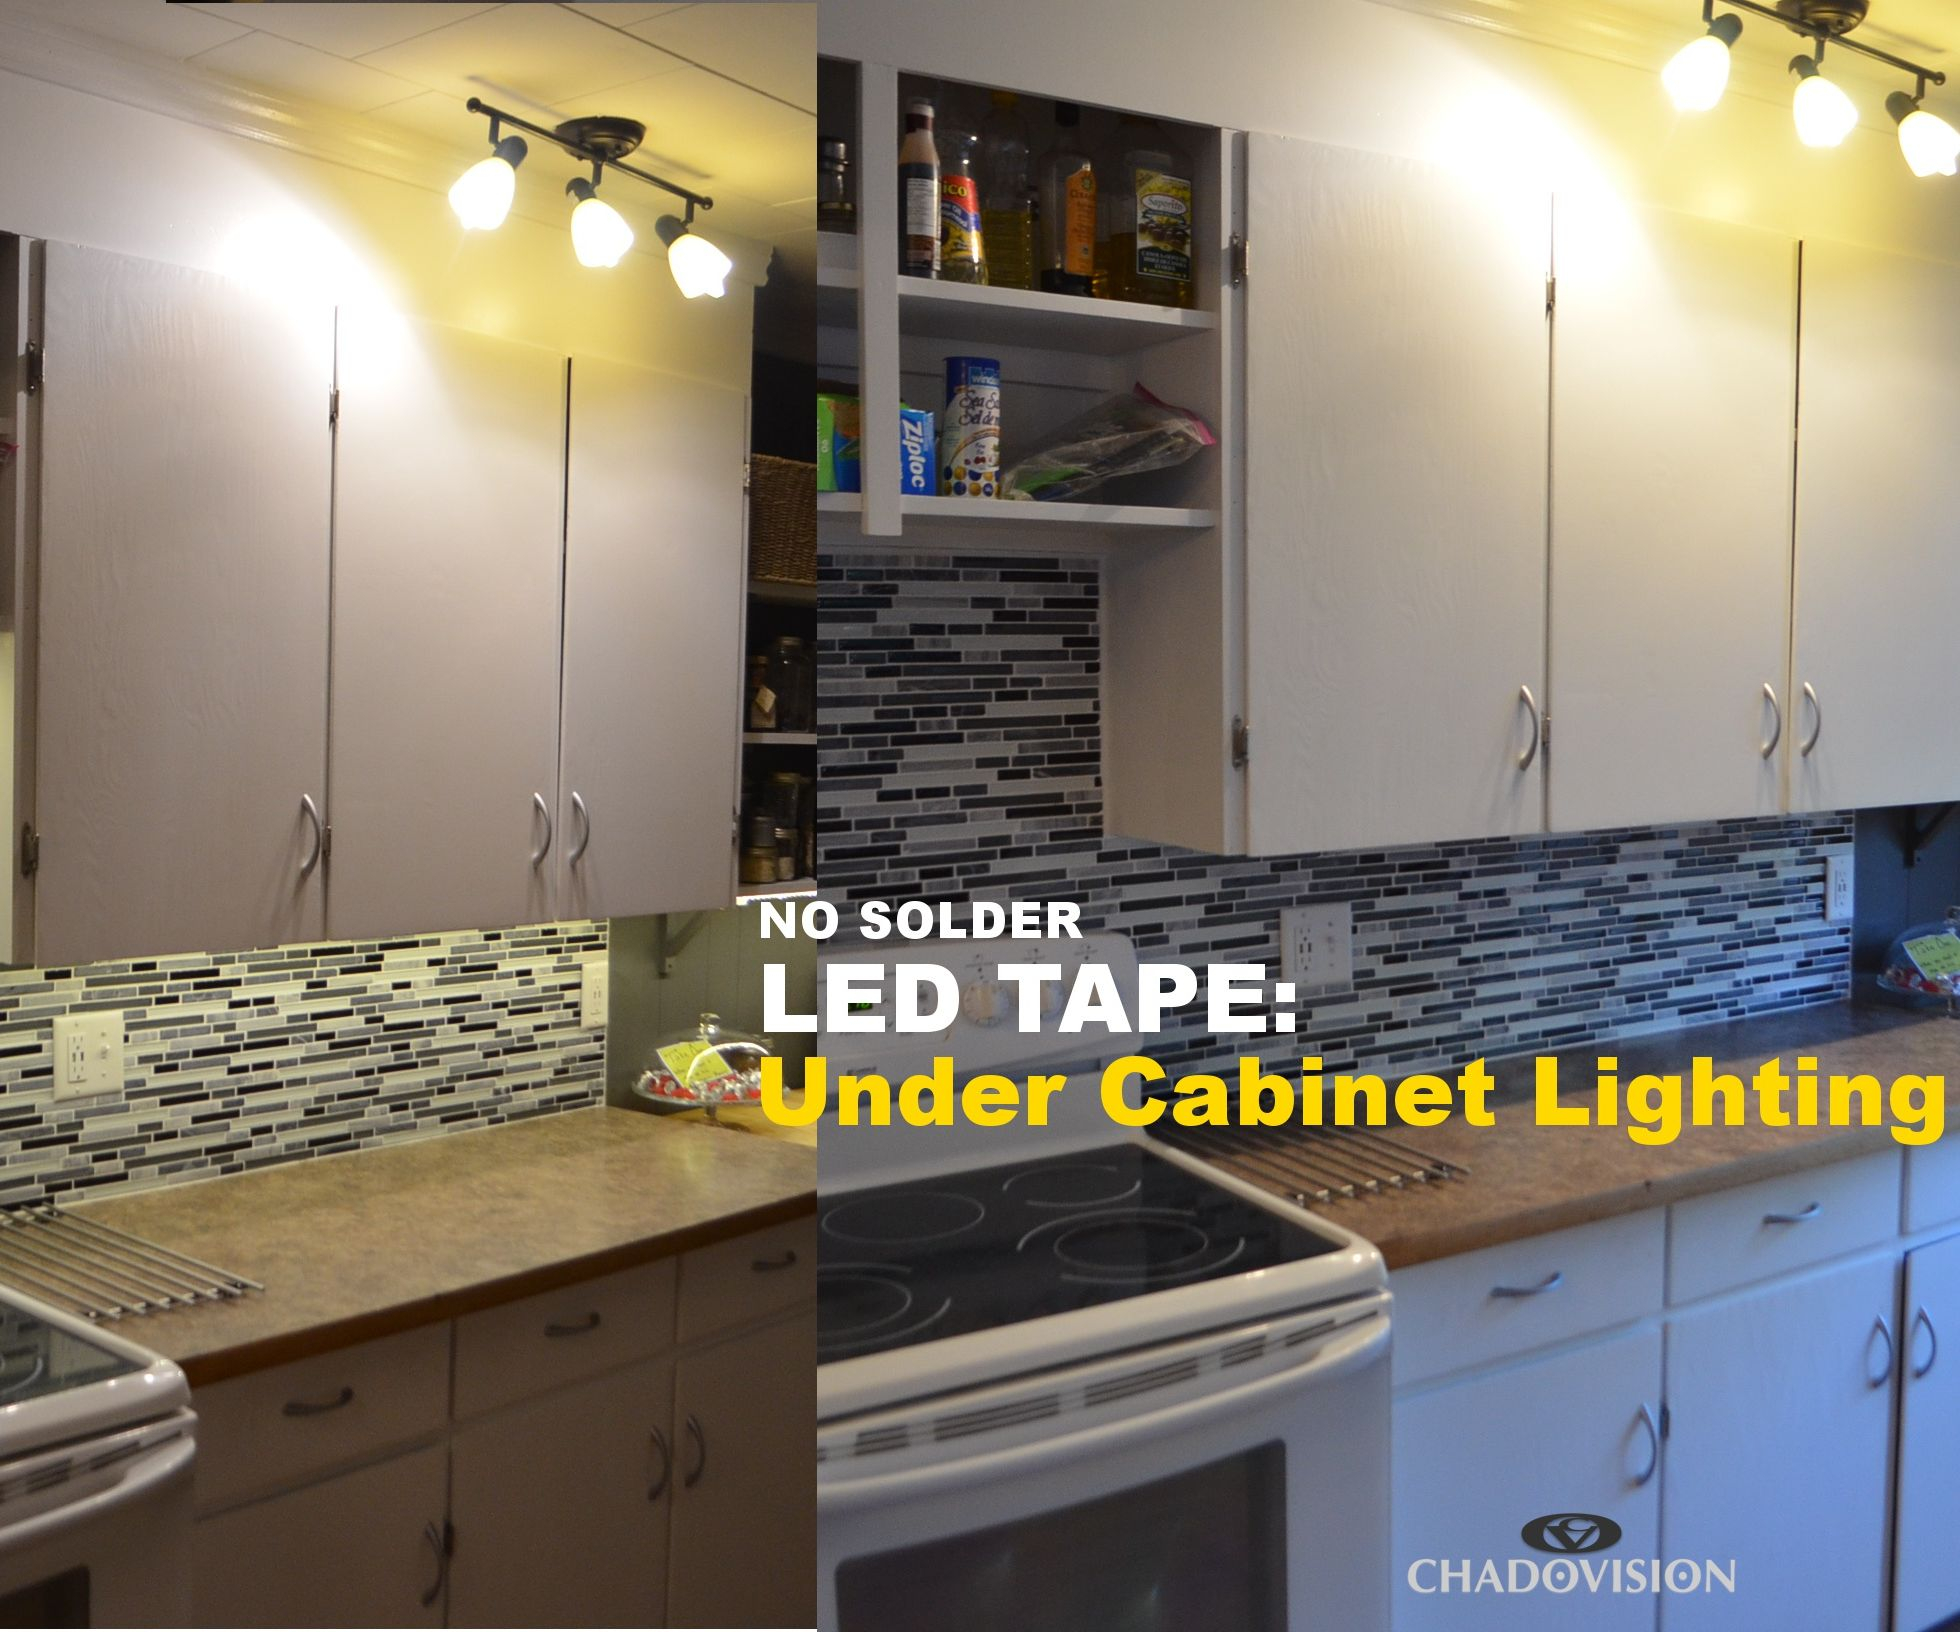 Led Tape Under Cabinet Lighting No Soldering 9 Steps throughout dimensions 1960 X 1632